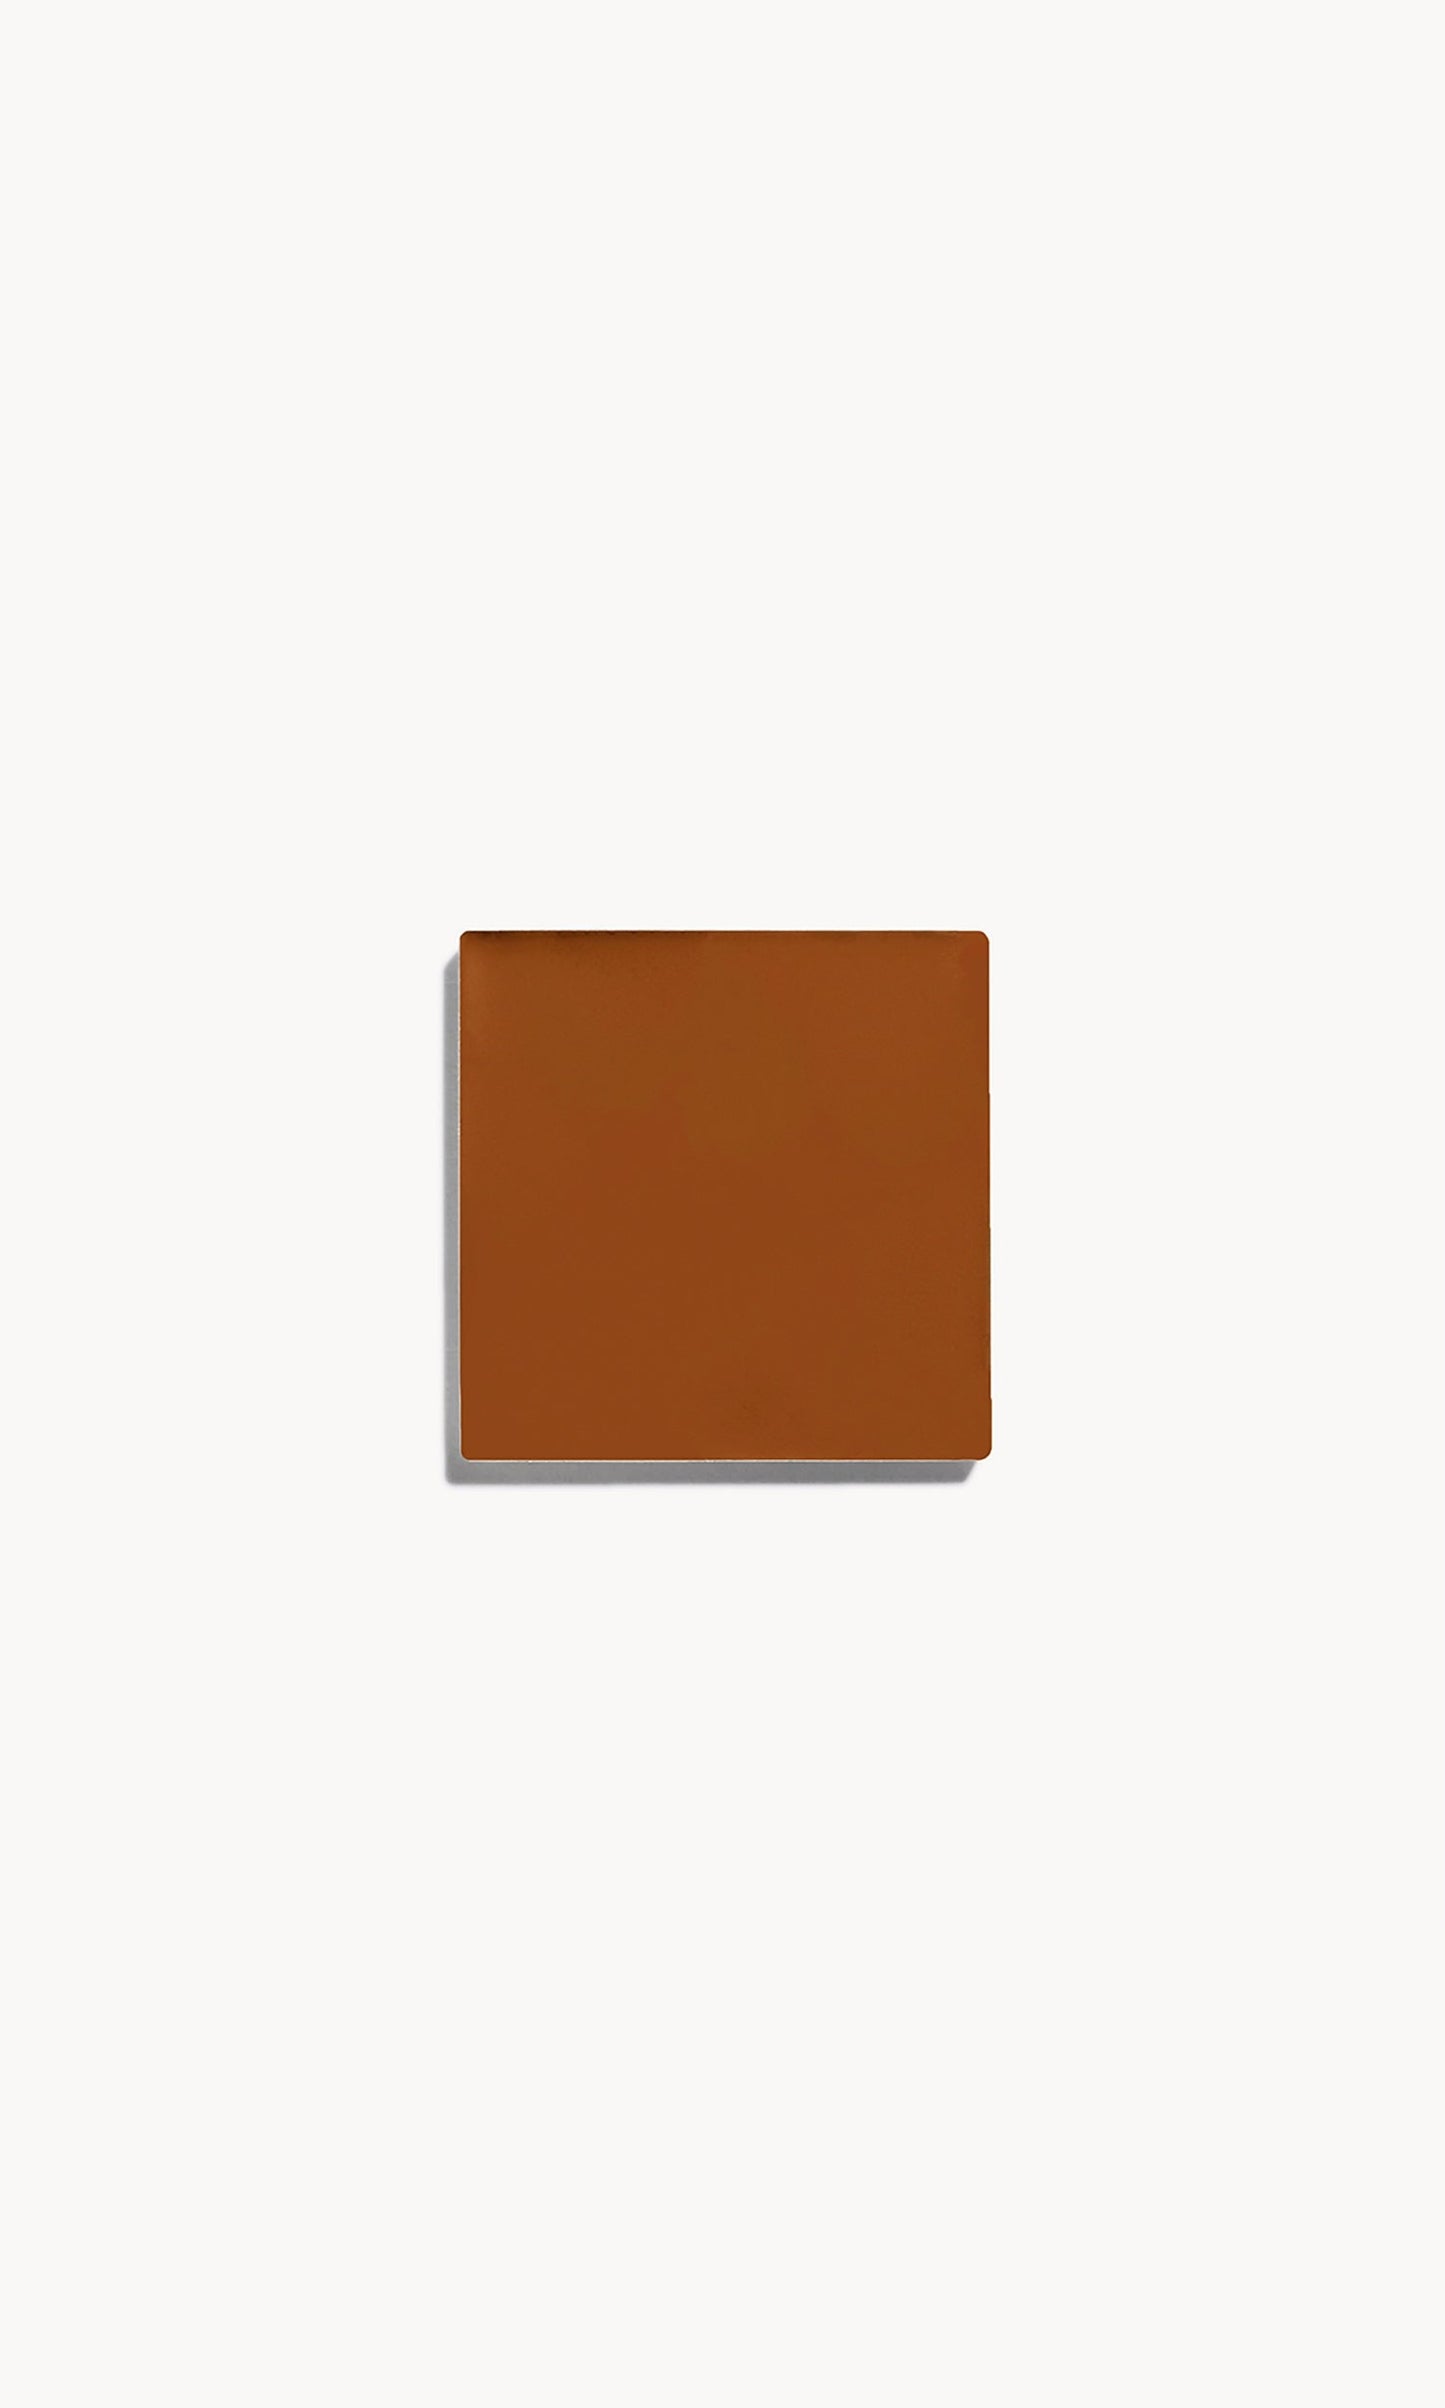 Square of deep neutral cream foundation on a white background